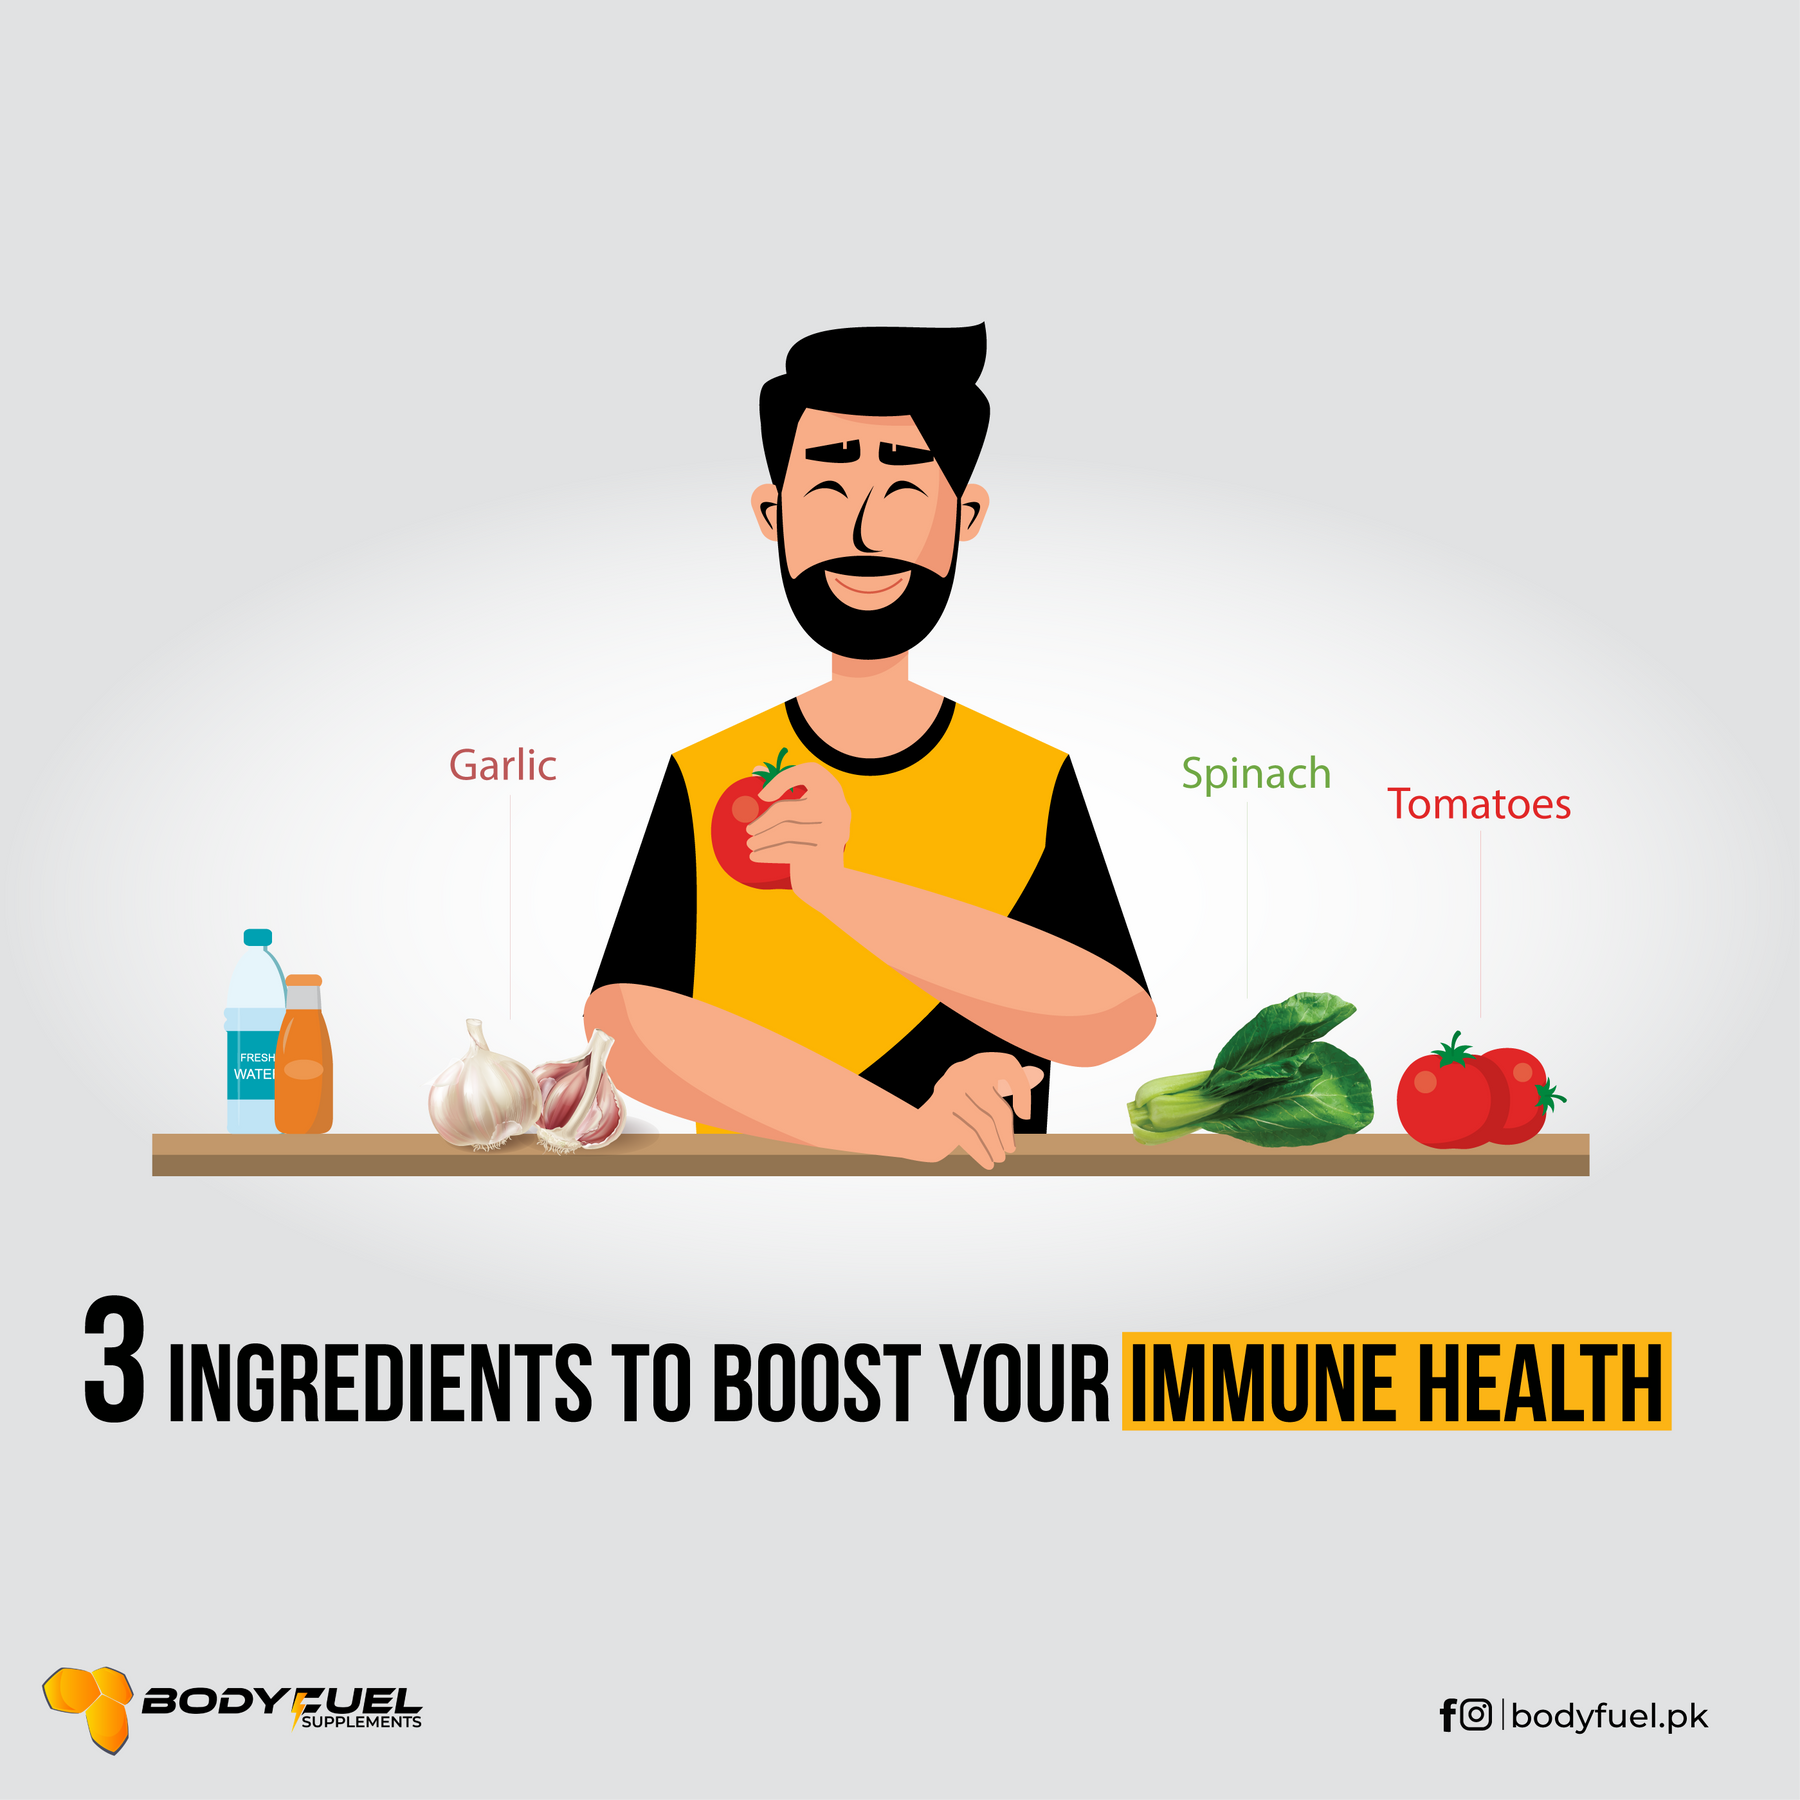 3 INGREDIENTS TO BOOST YOUR IMMUNE HEALTH